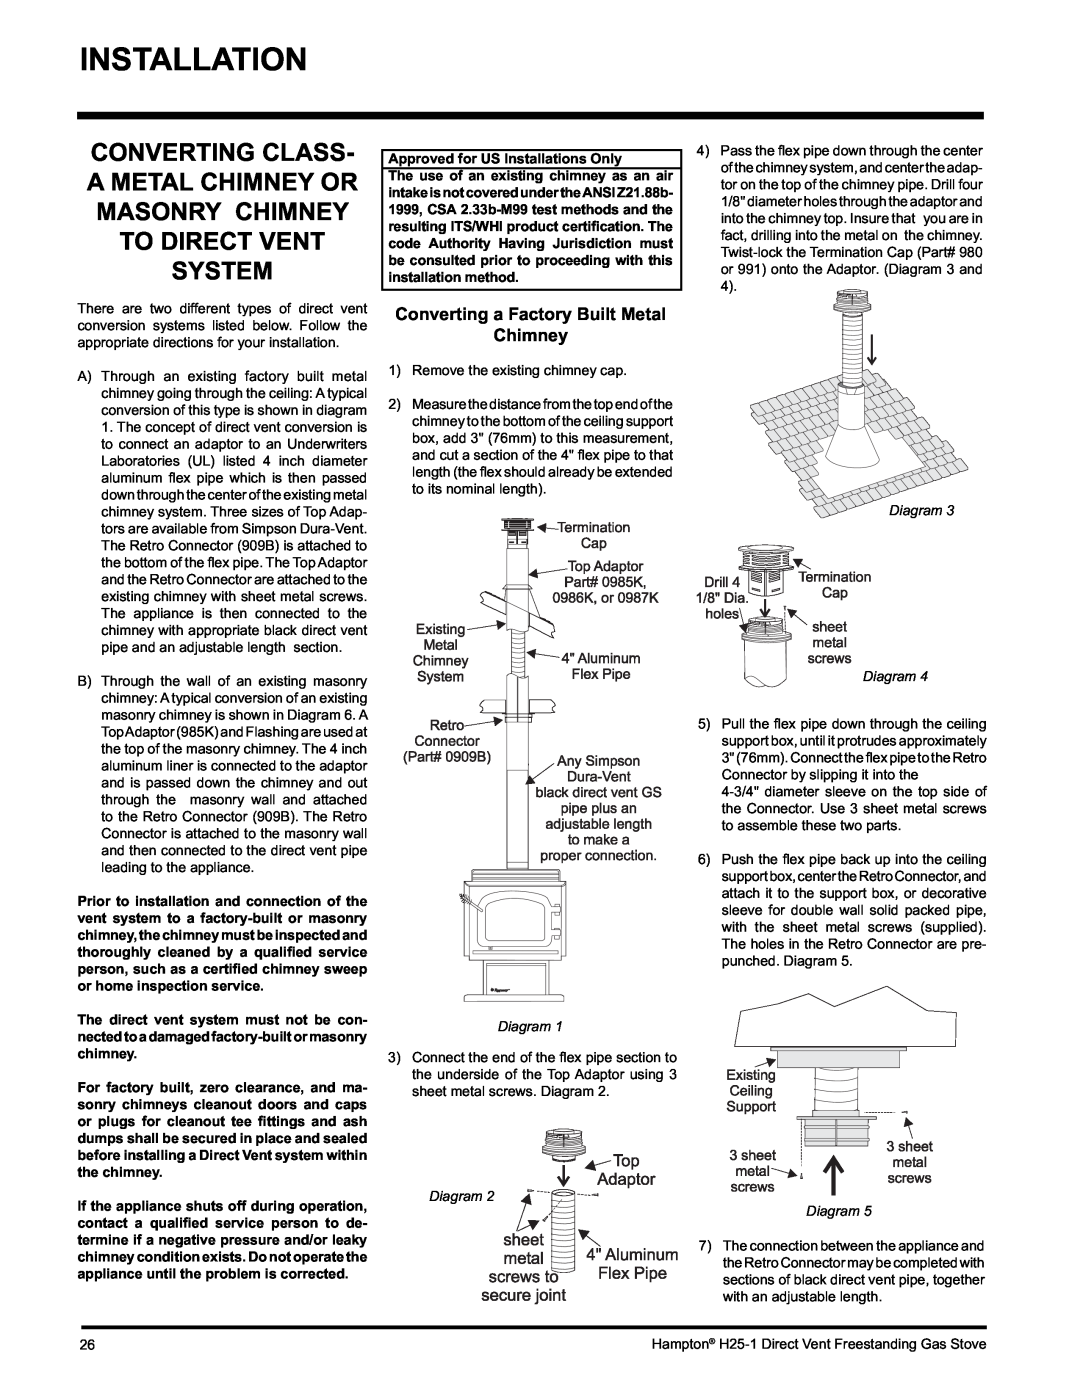 Hampton Direct H25-NG1, H25-LP1 Converting a Factory Built Metal Chimney, Approved for US Installations Only, Diagram 